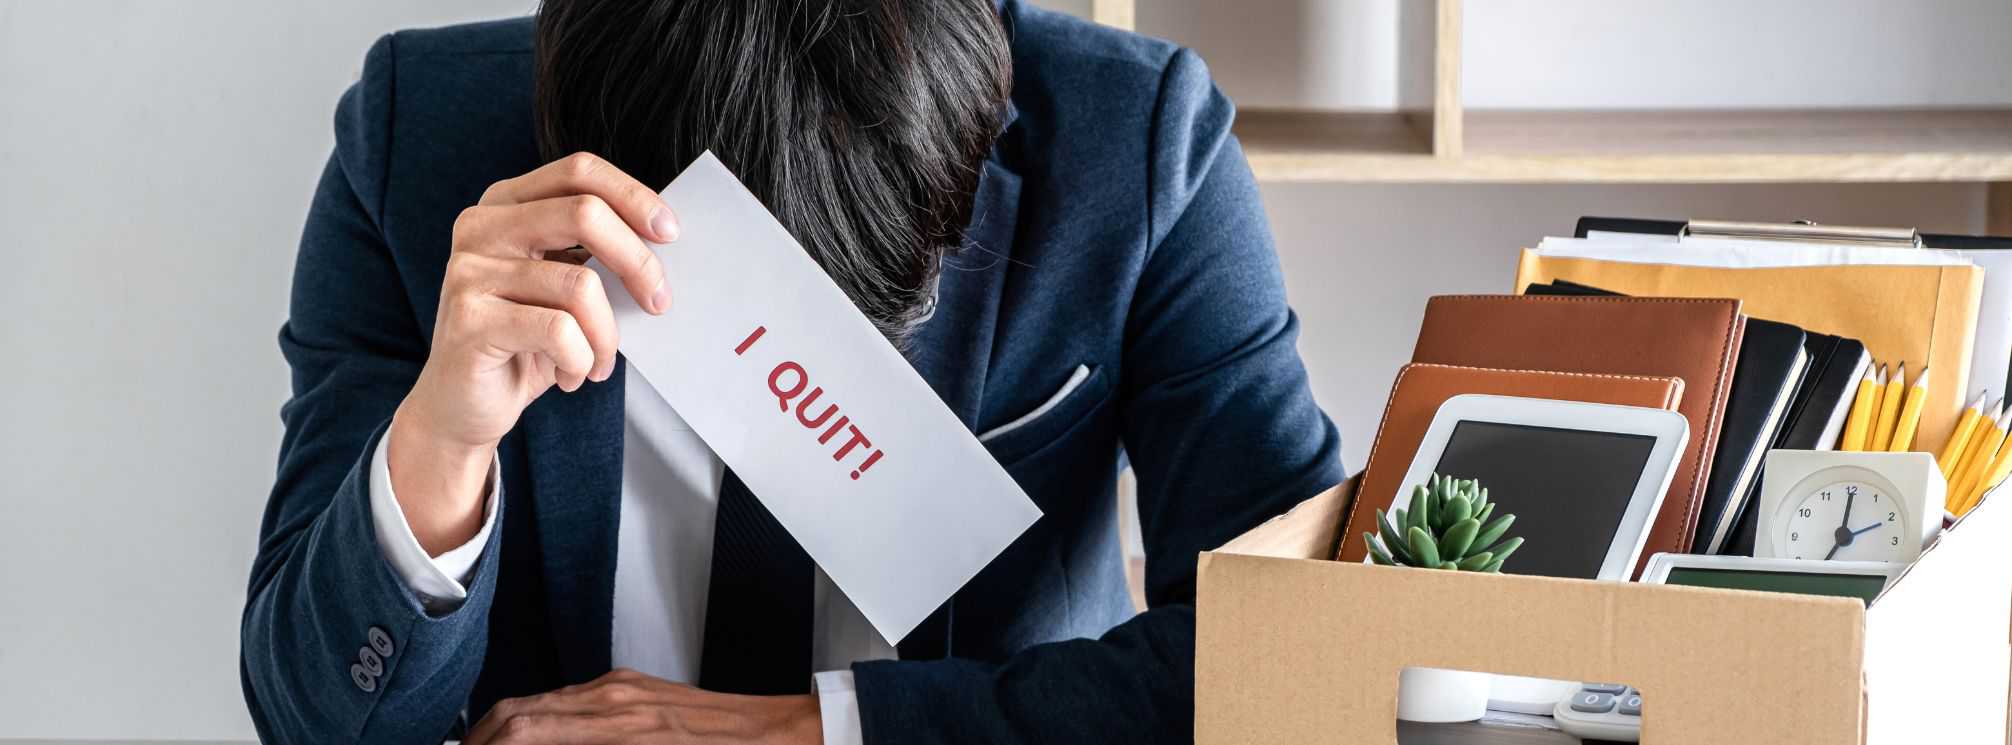 Despondent employee sitting next to a box of their office possessions, holding a sign that says "I quit!"